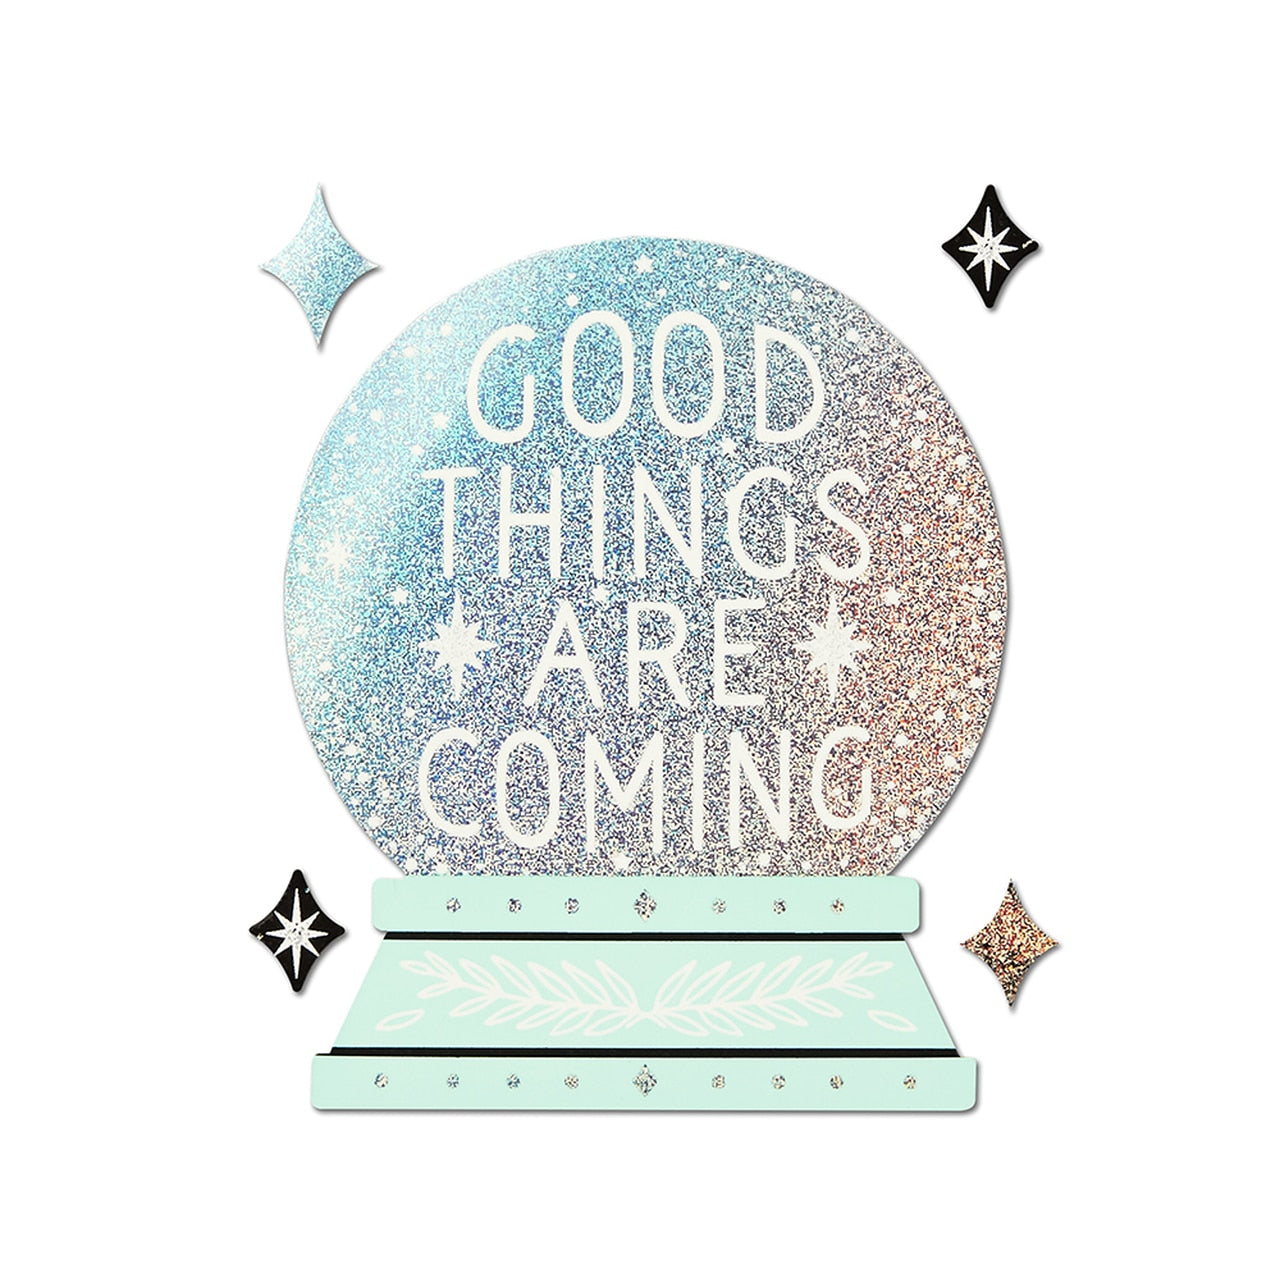 Sticker " Good Things Are Coming "